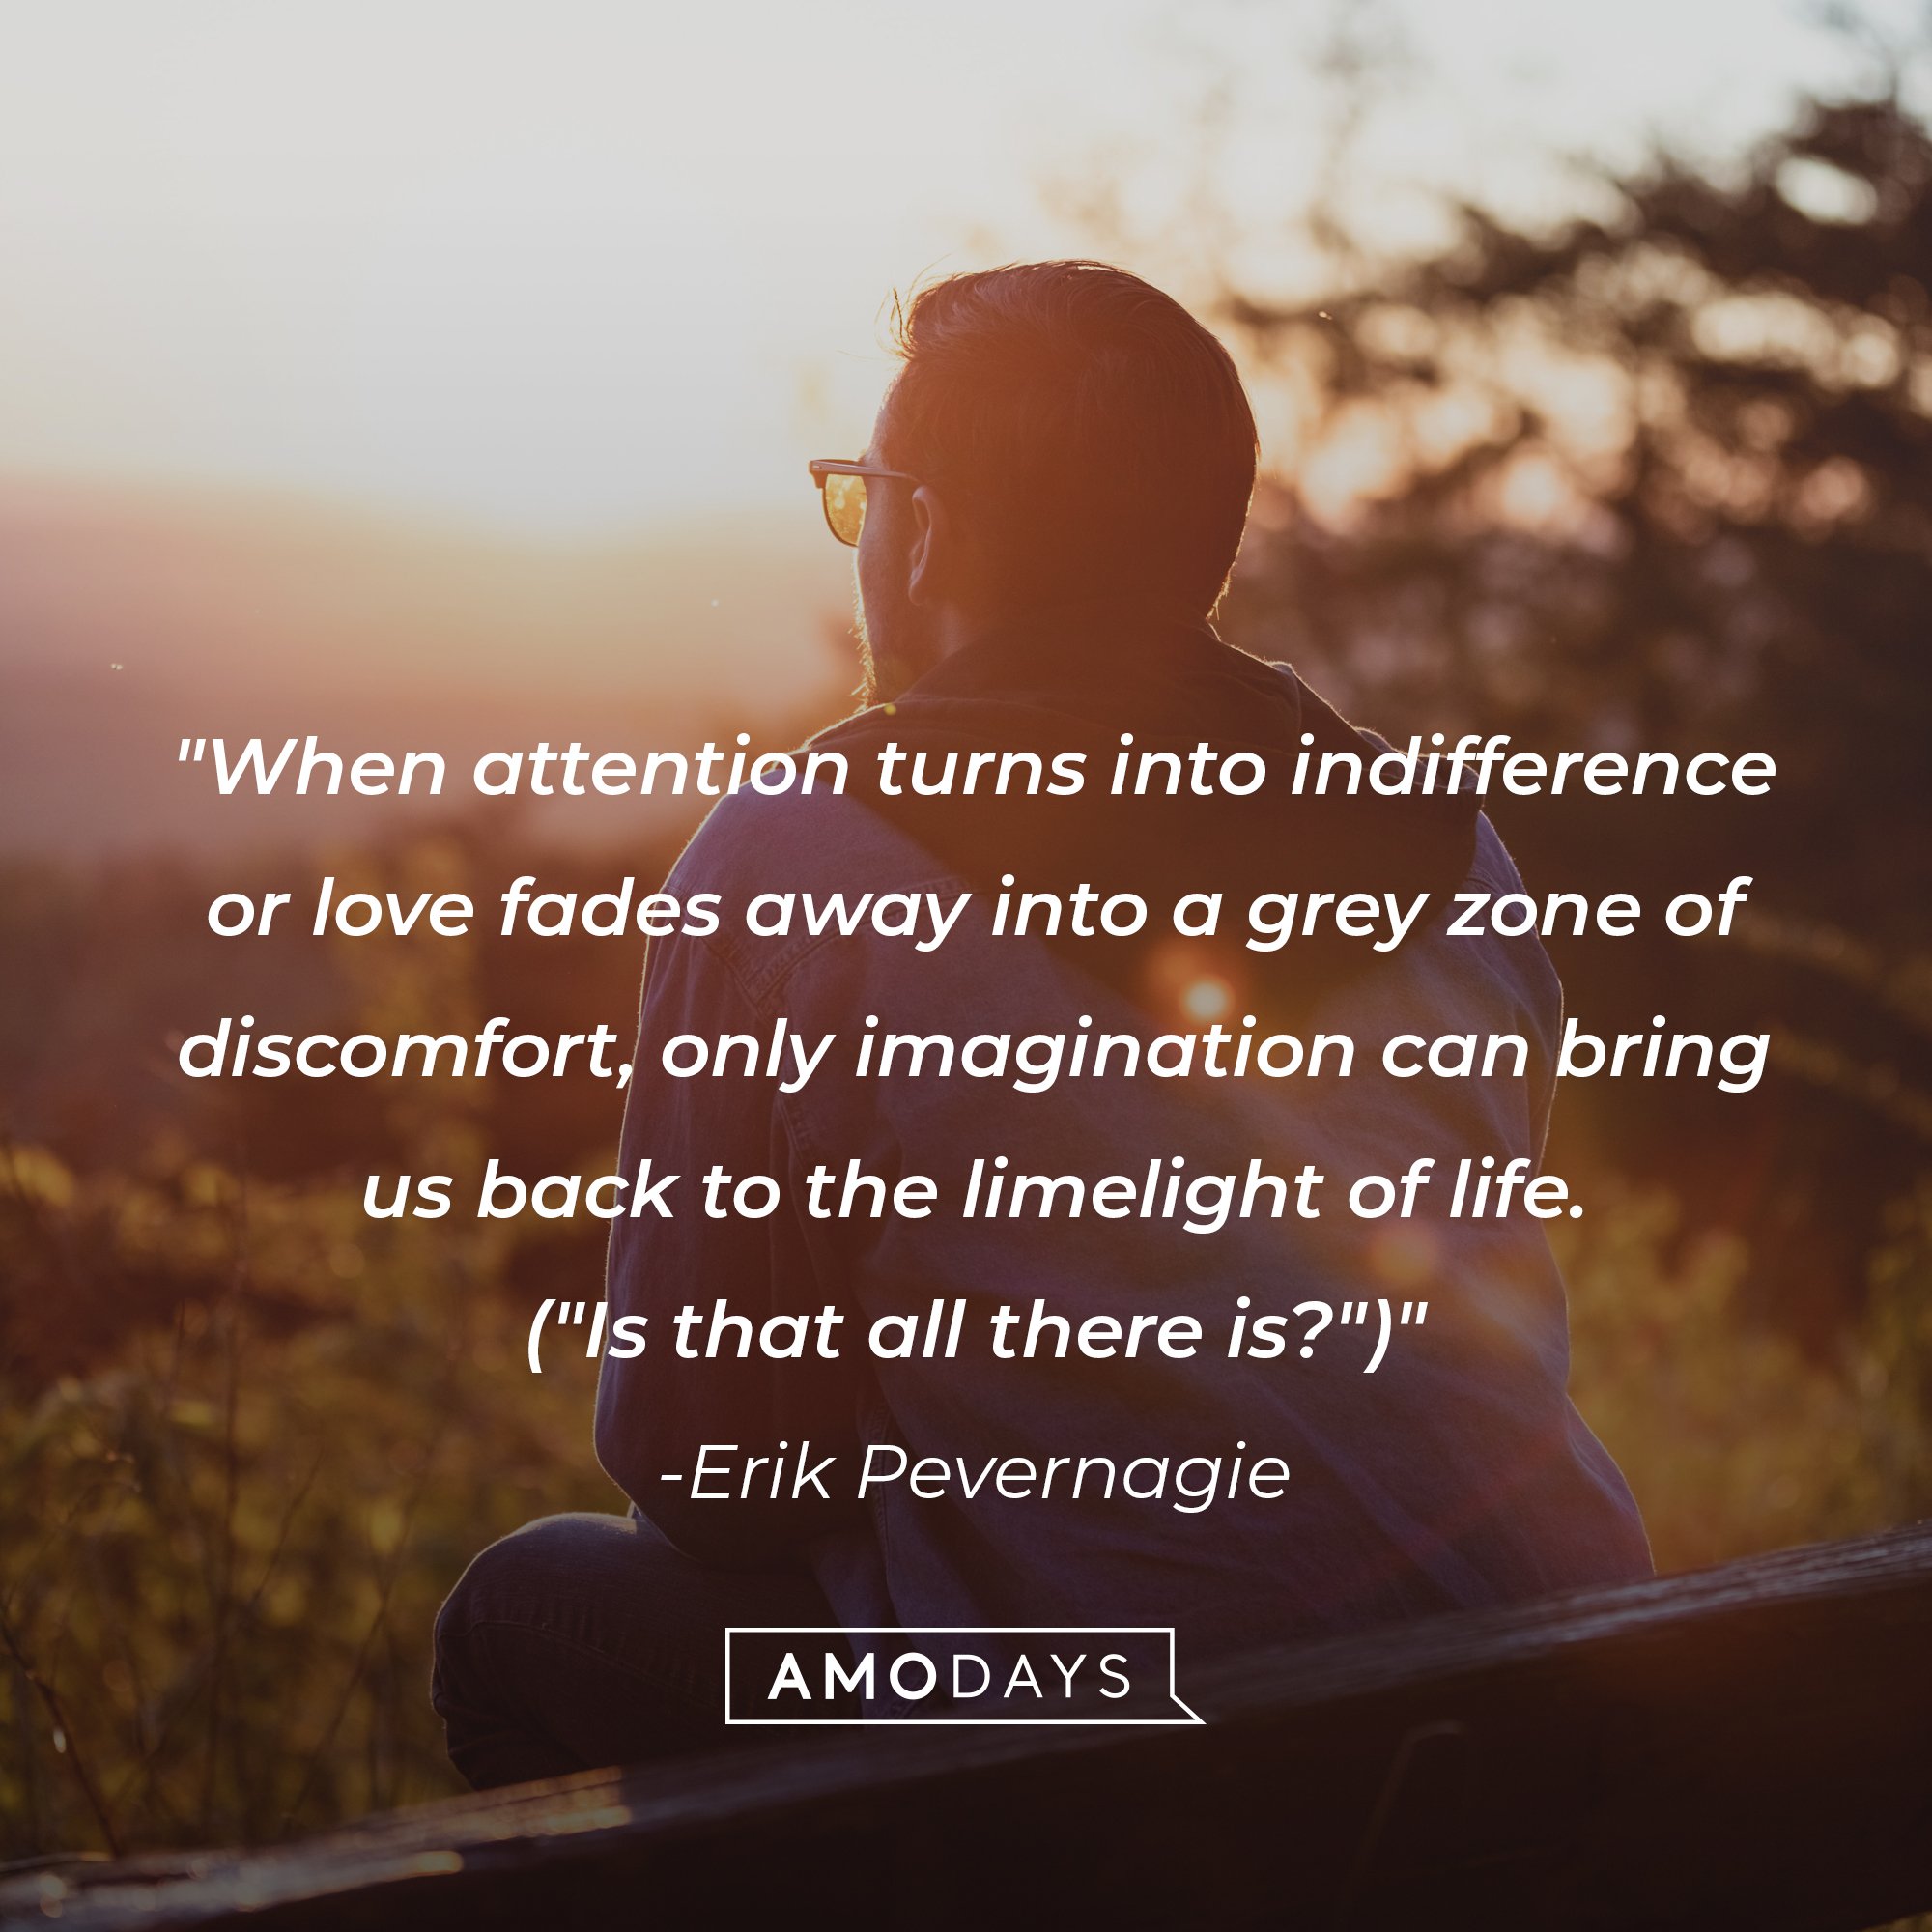 Erik Pevernagie's quote: "When attention turns into indifference or love fades away into a grey zone of discomfort, only imagination can bring us back to the limelight of life. ("Is that all there is?")" | Image: AmoDays